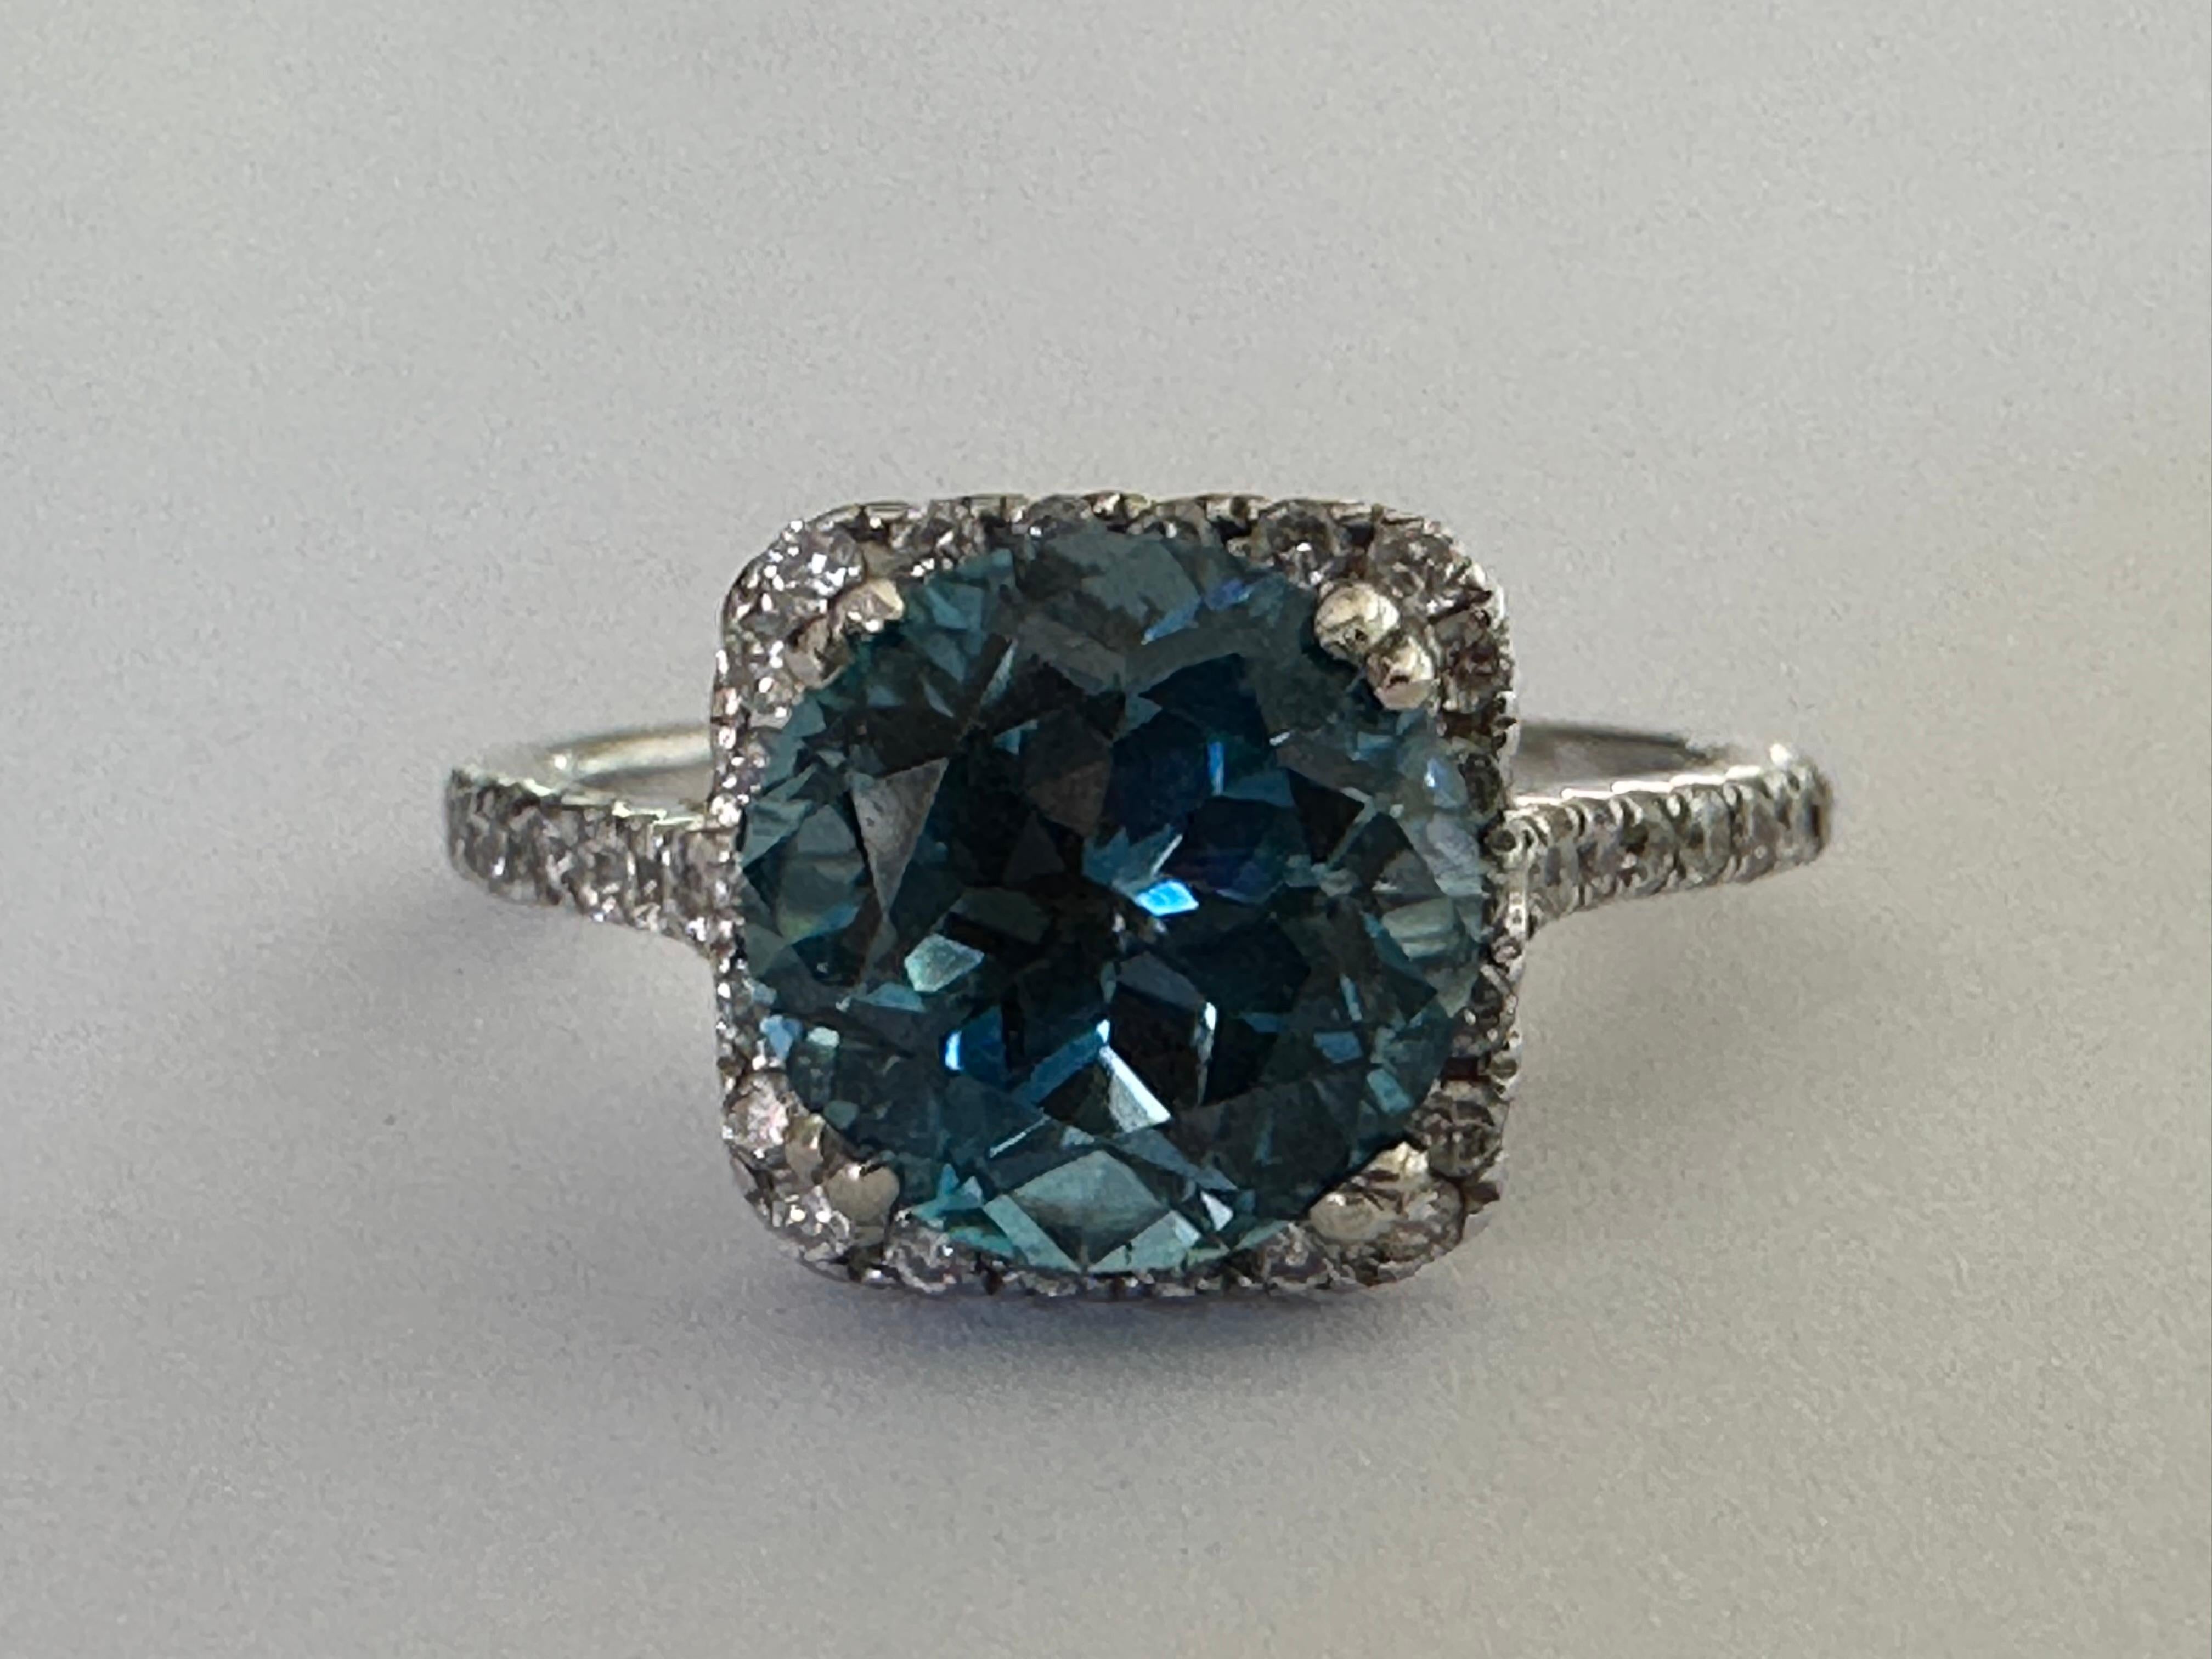 A natural blue round-shaped topaz centers this dazzling ring. The 2.52-carat gem is encircled by a halo of 0.42 carats of sparkling white brilliant-cut diamonds, F color, SI1-2 clarity. Set in 14K white gold. 